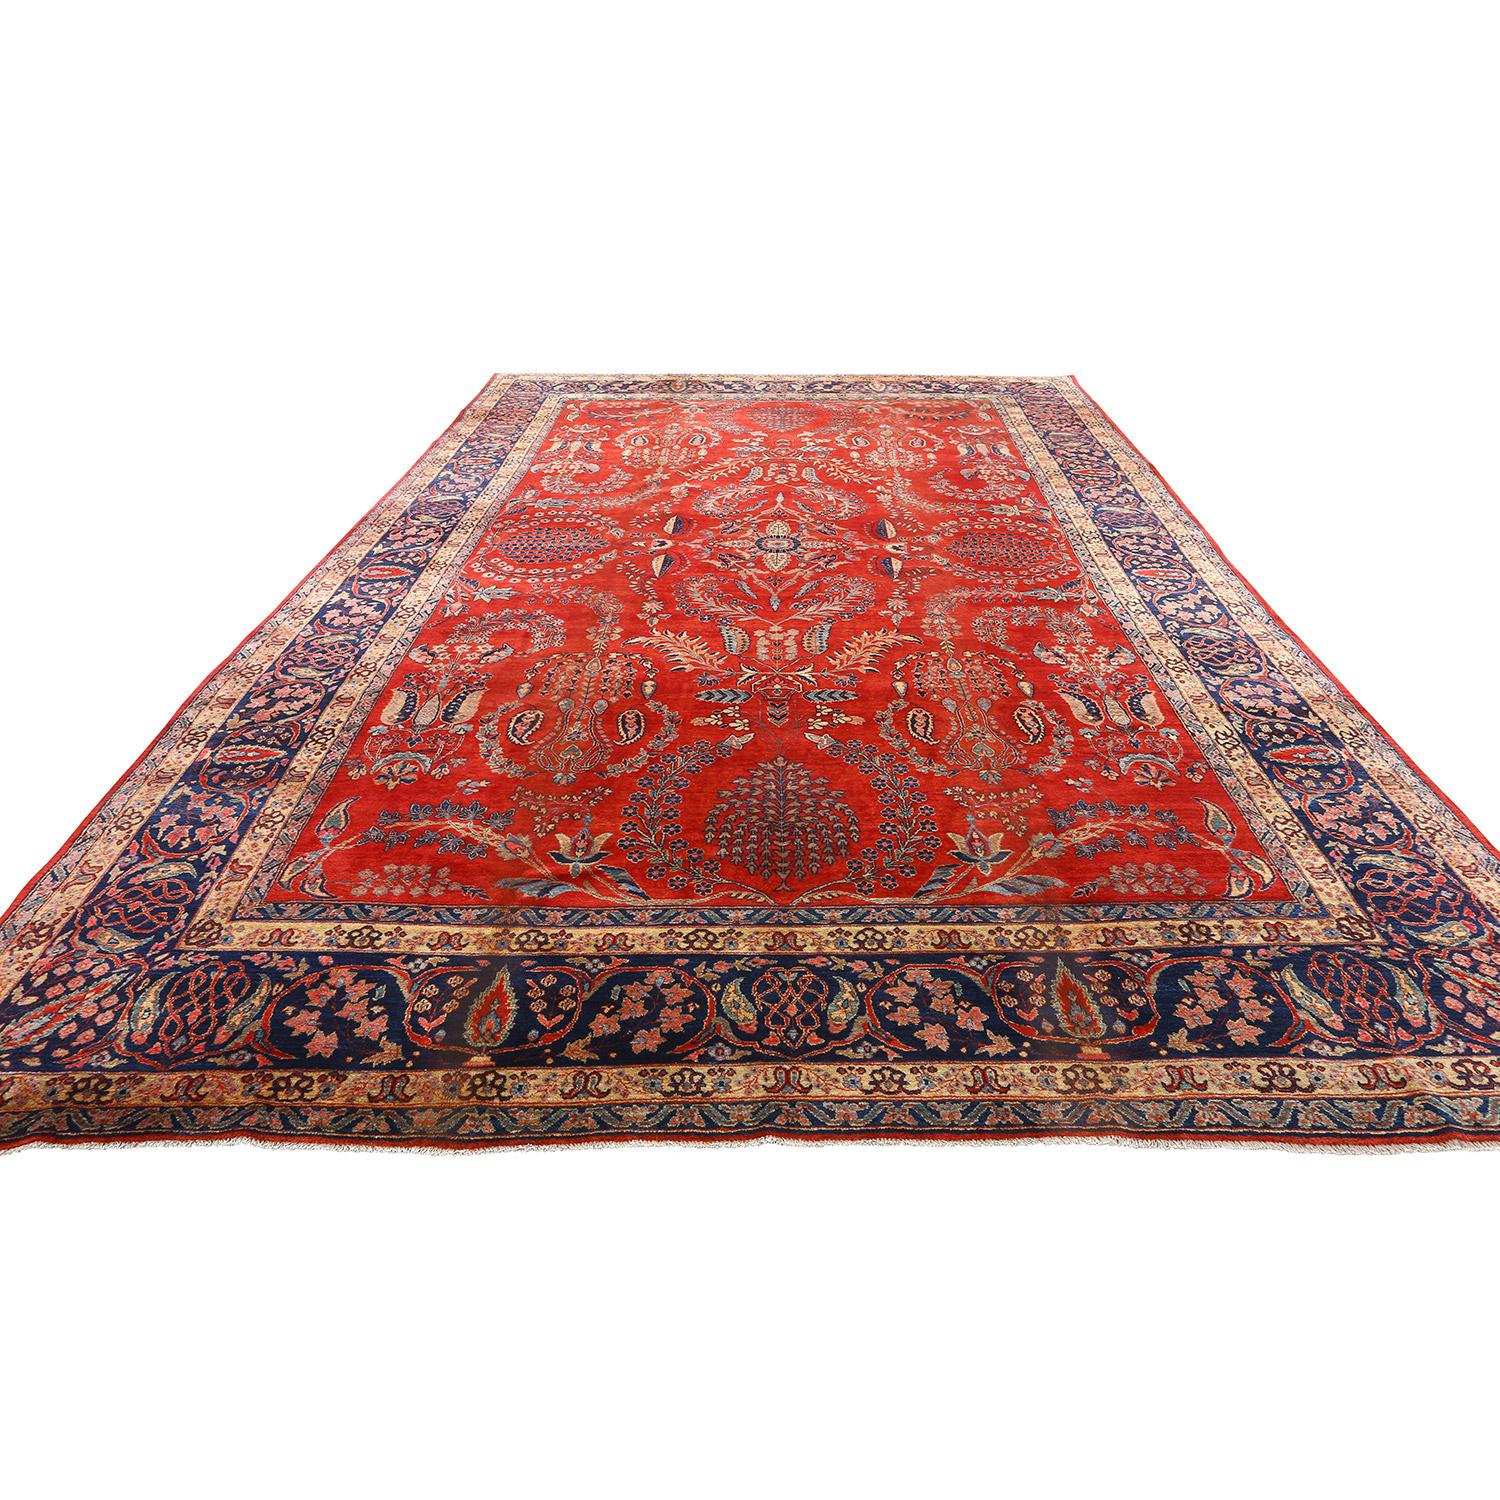 This Antique Sarook Mohajeran Rug, measuring an impressive 14 feet by 10 feet, is a true masterpiece that exemplifies the pinnacle of Persian craftsmanship. With its grand All-Over Design, adorned in rich shades of cherry and navy, it offers a